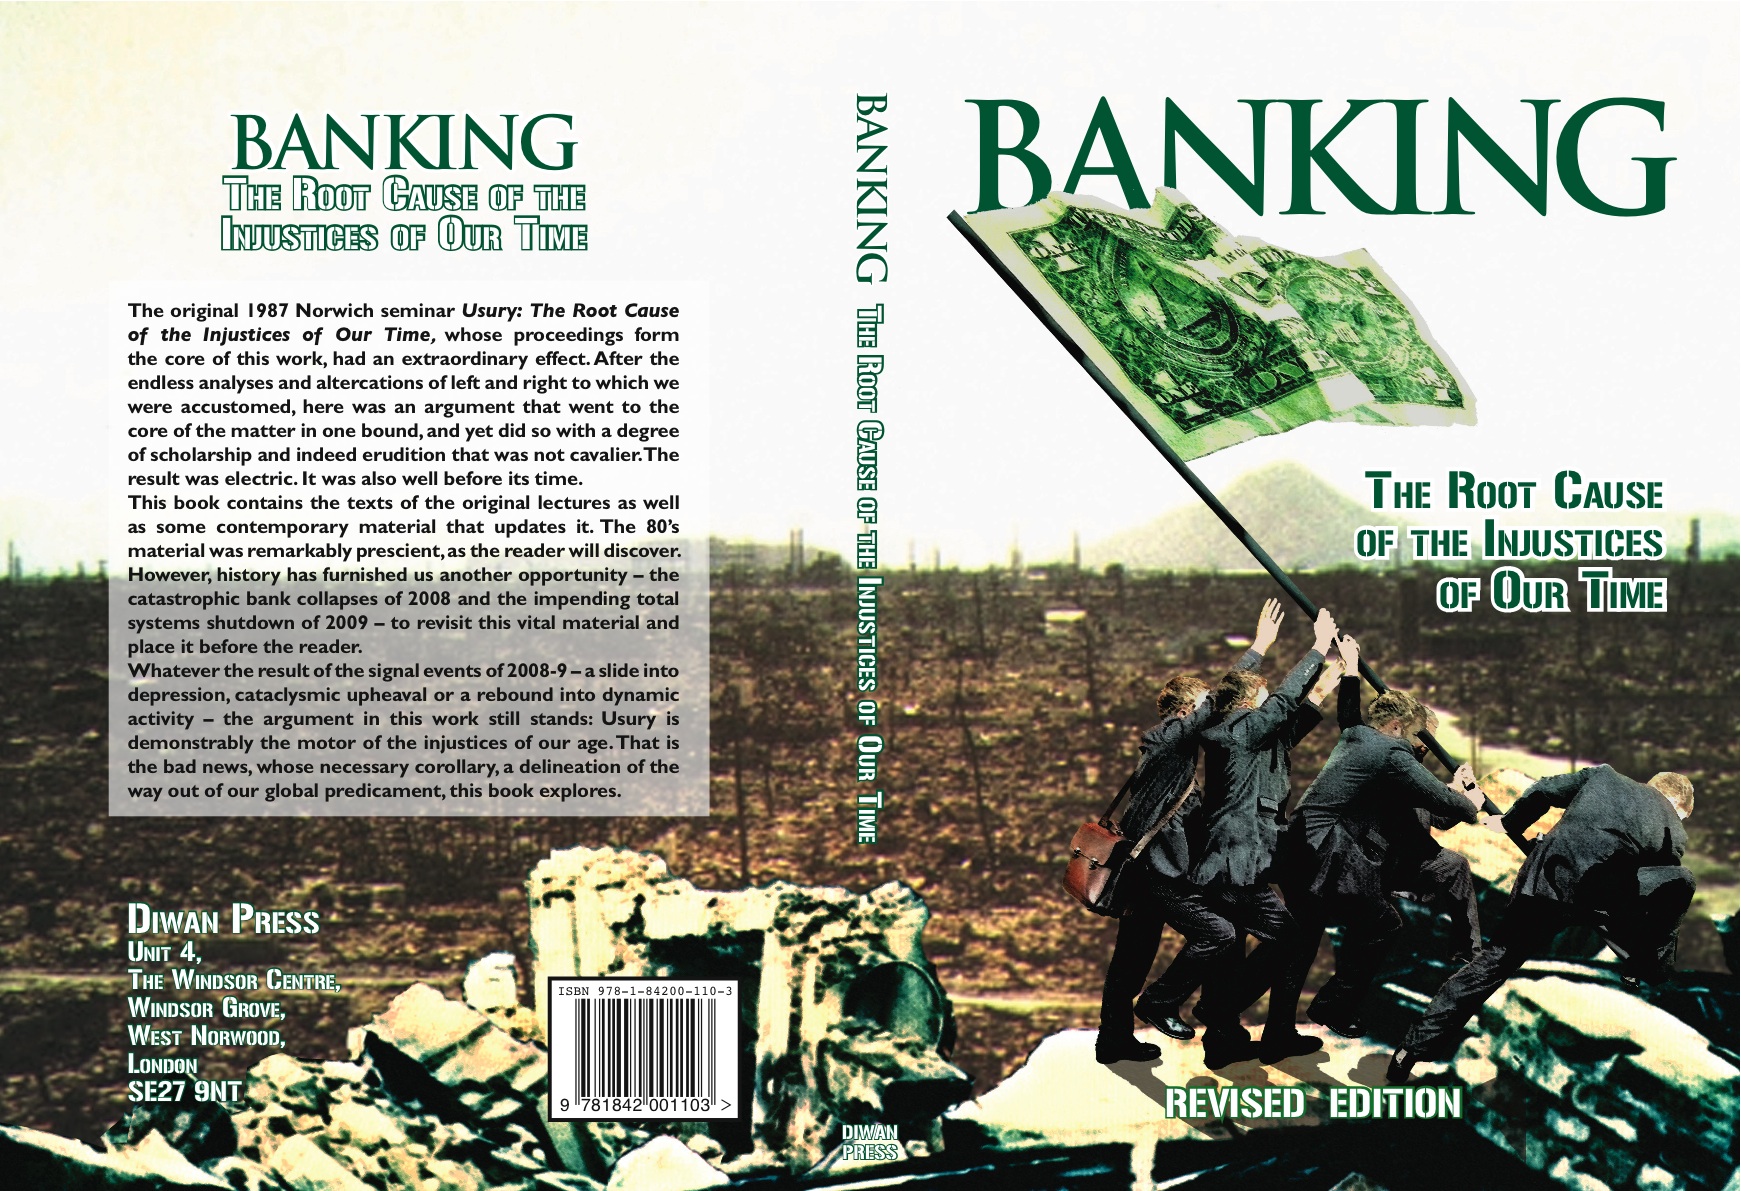 Banking: the root cause of the injustices of our time